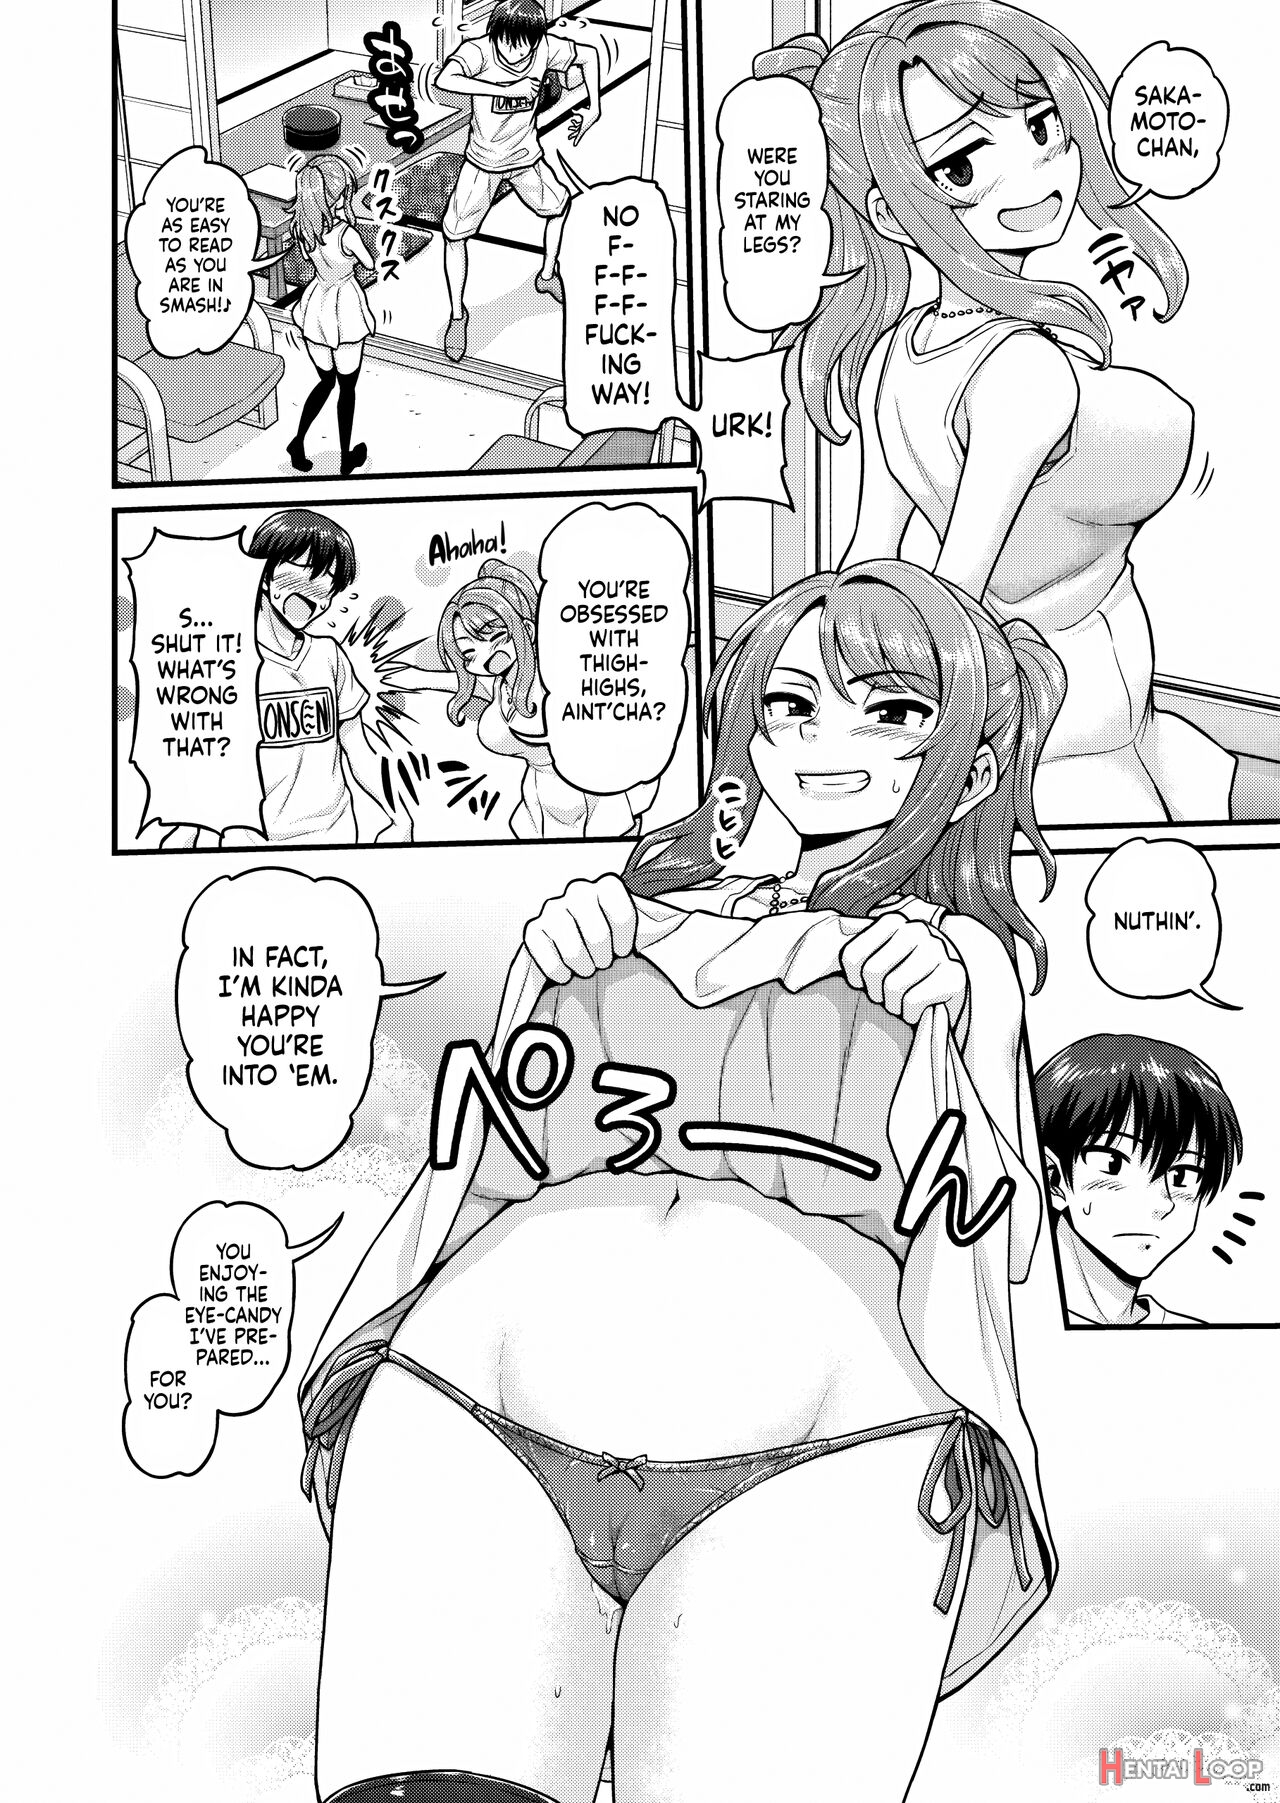 Smashing With Your Gamer Girl Friend At The Hot Spring page 3